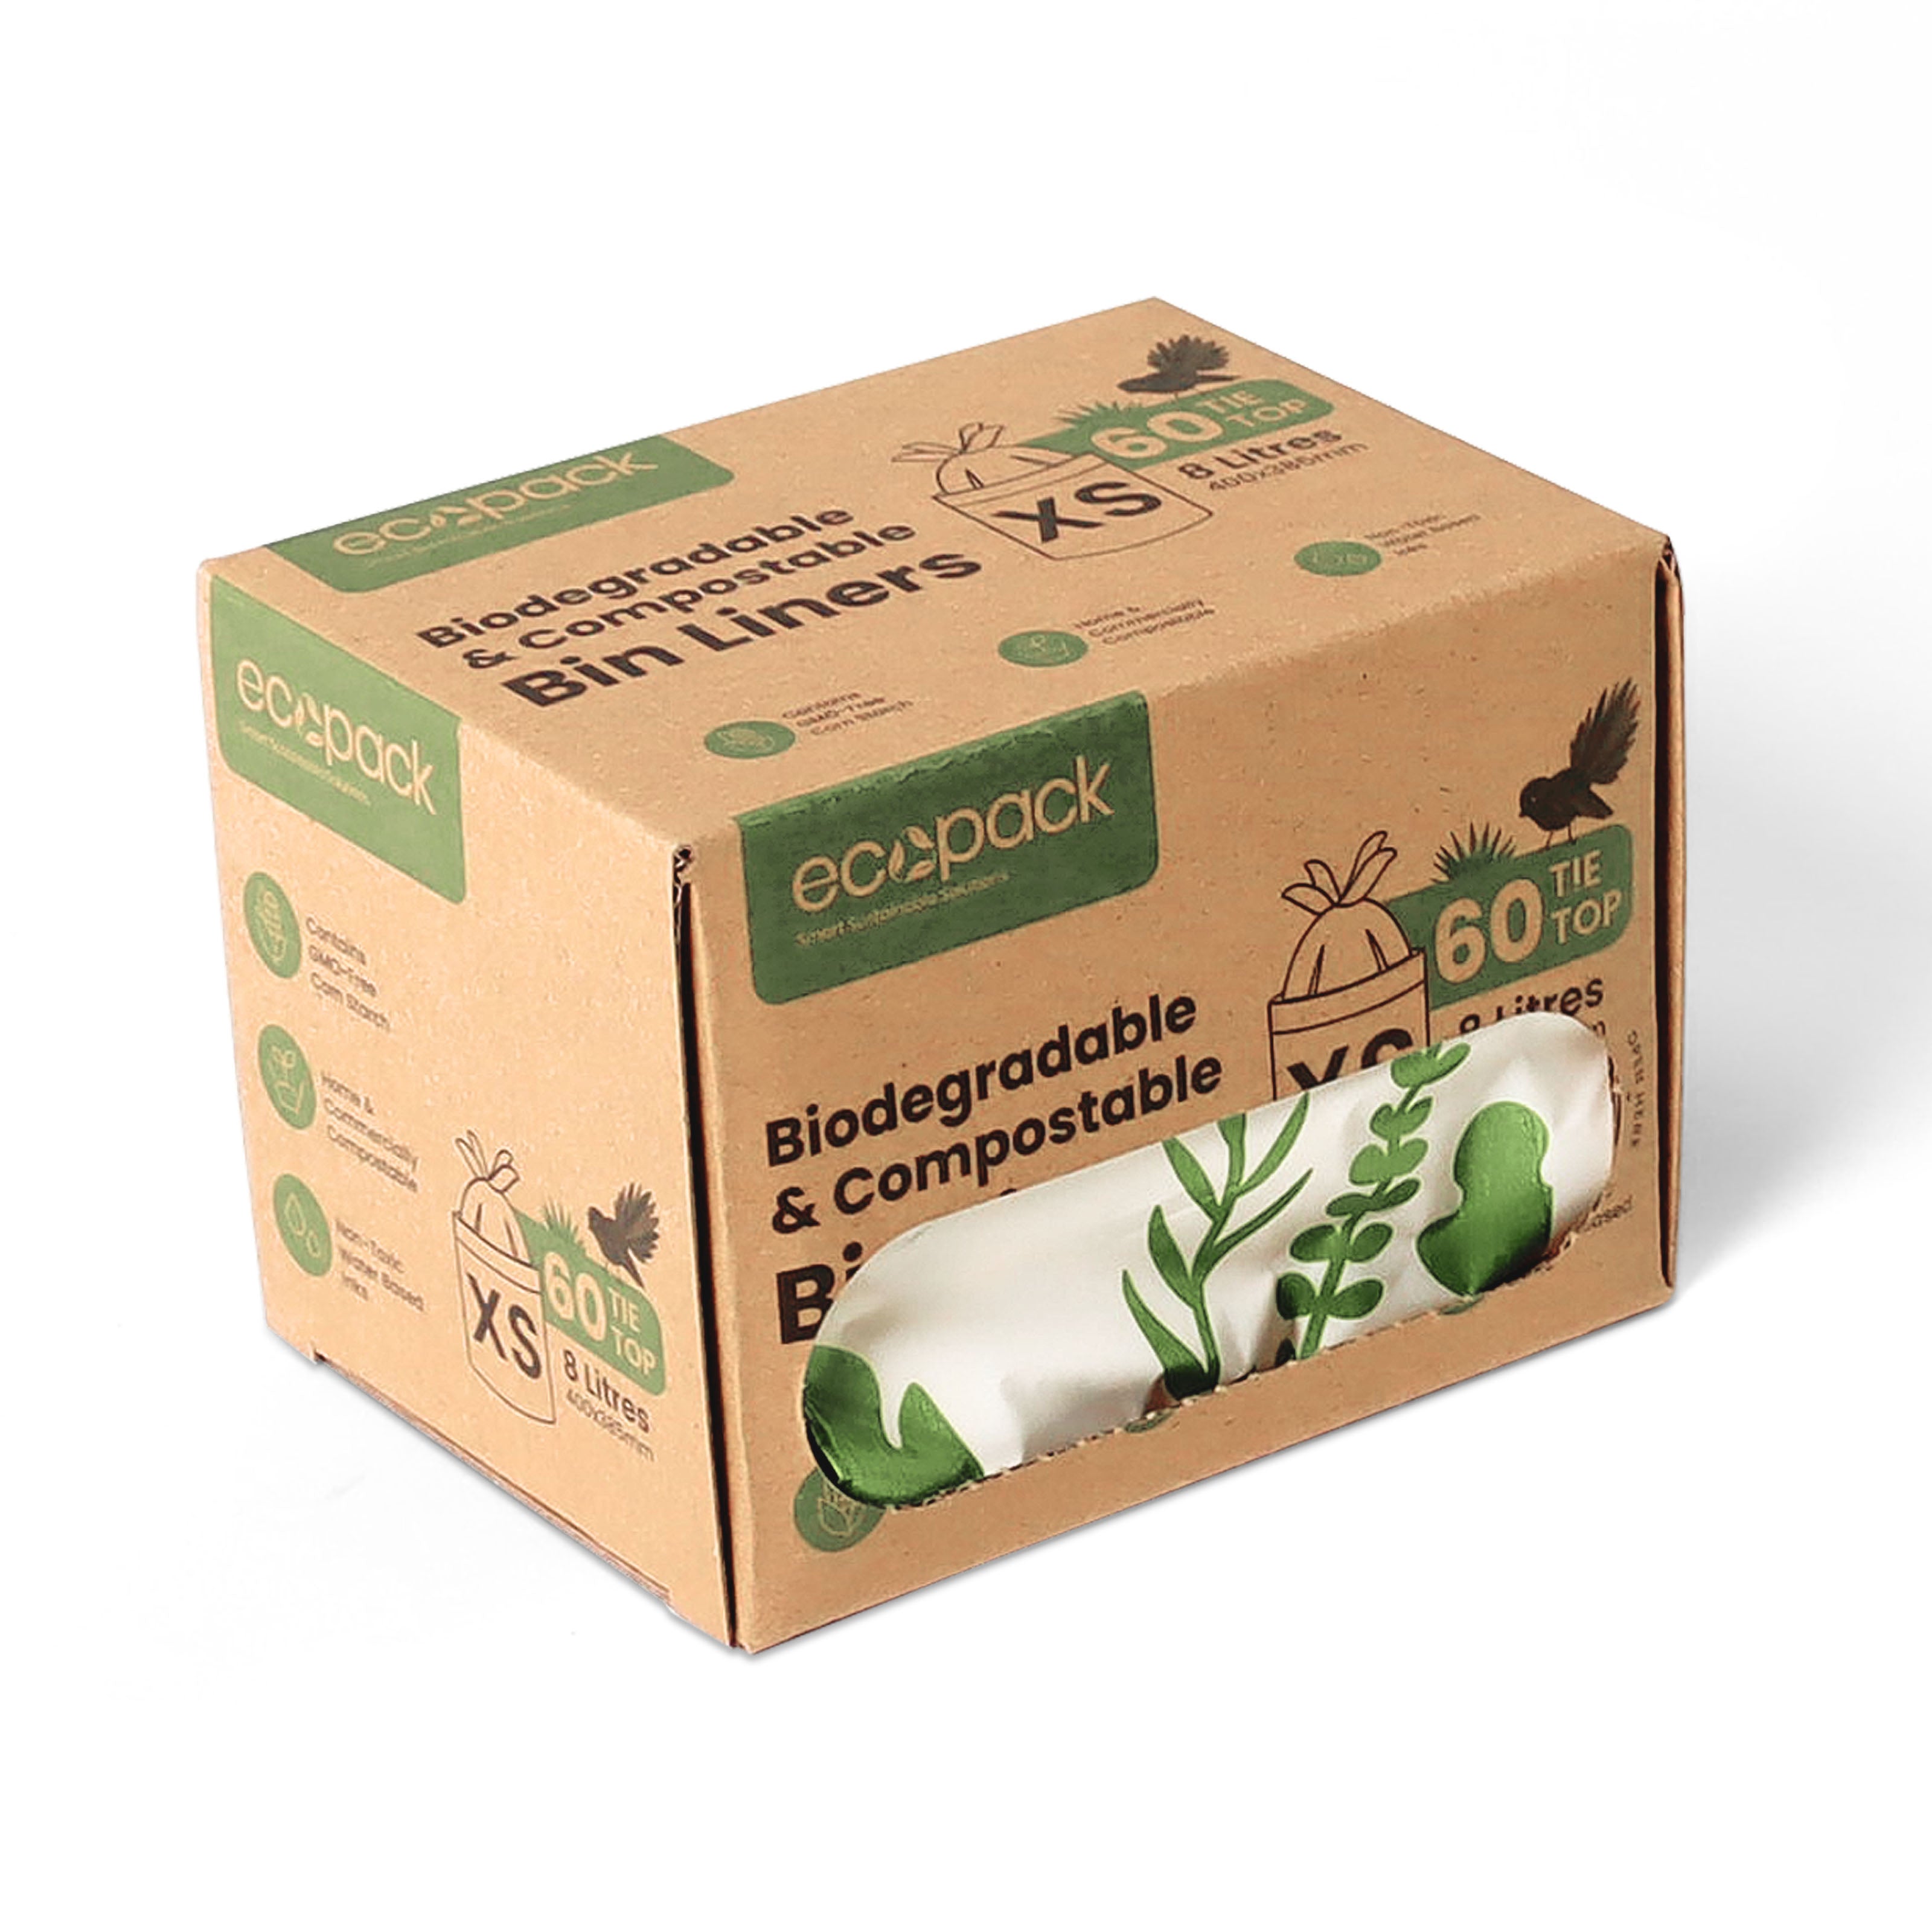 ED4408 8L Compostable Caddy Liners - Box of 60